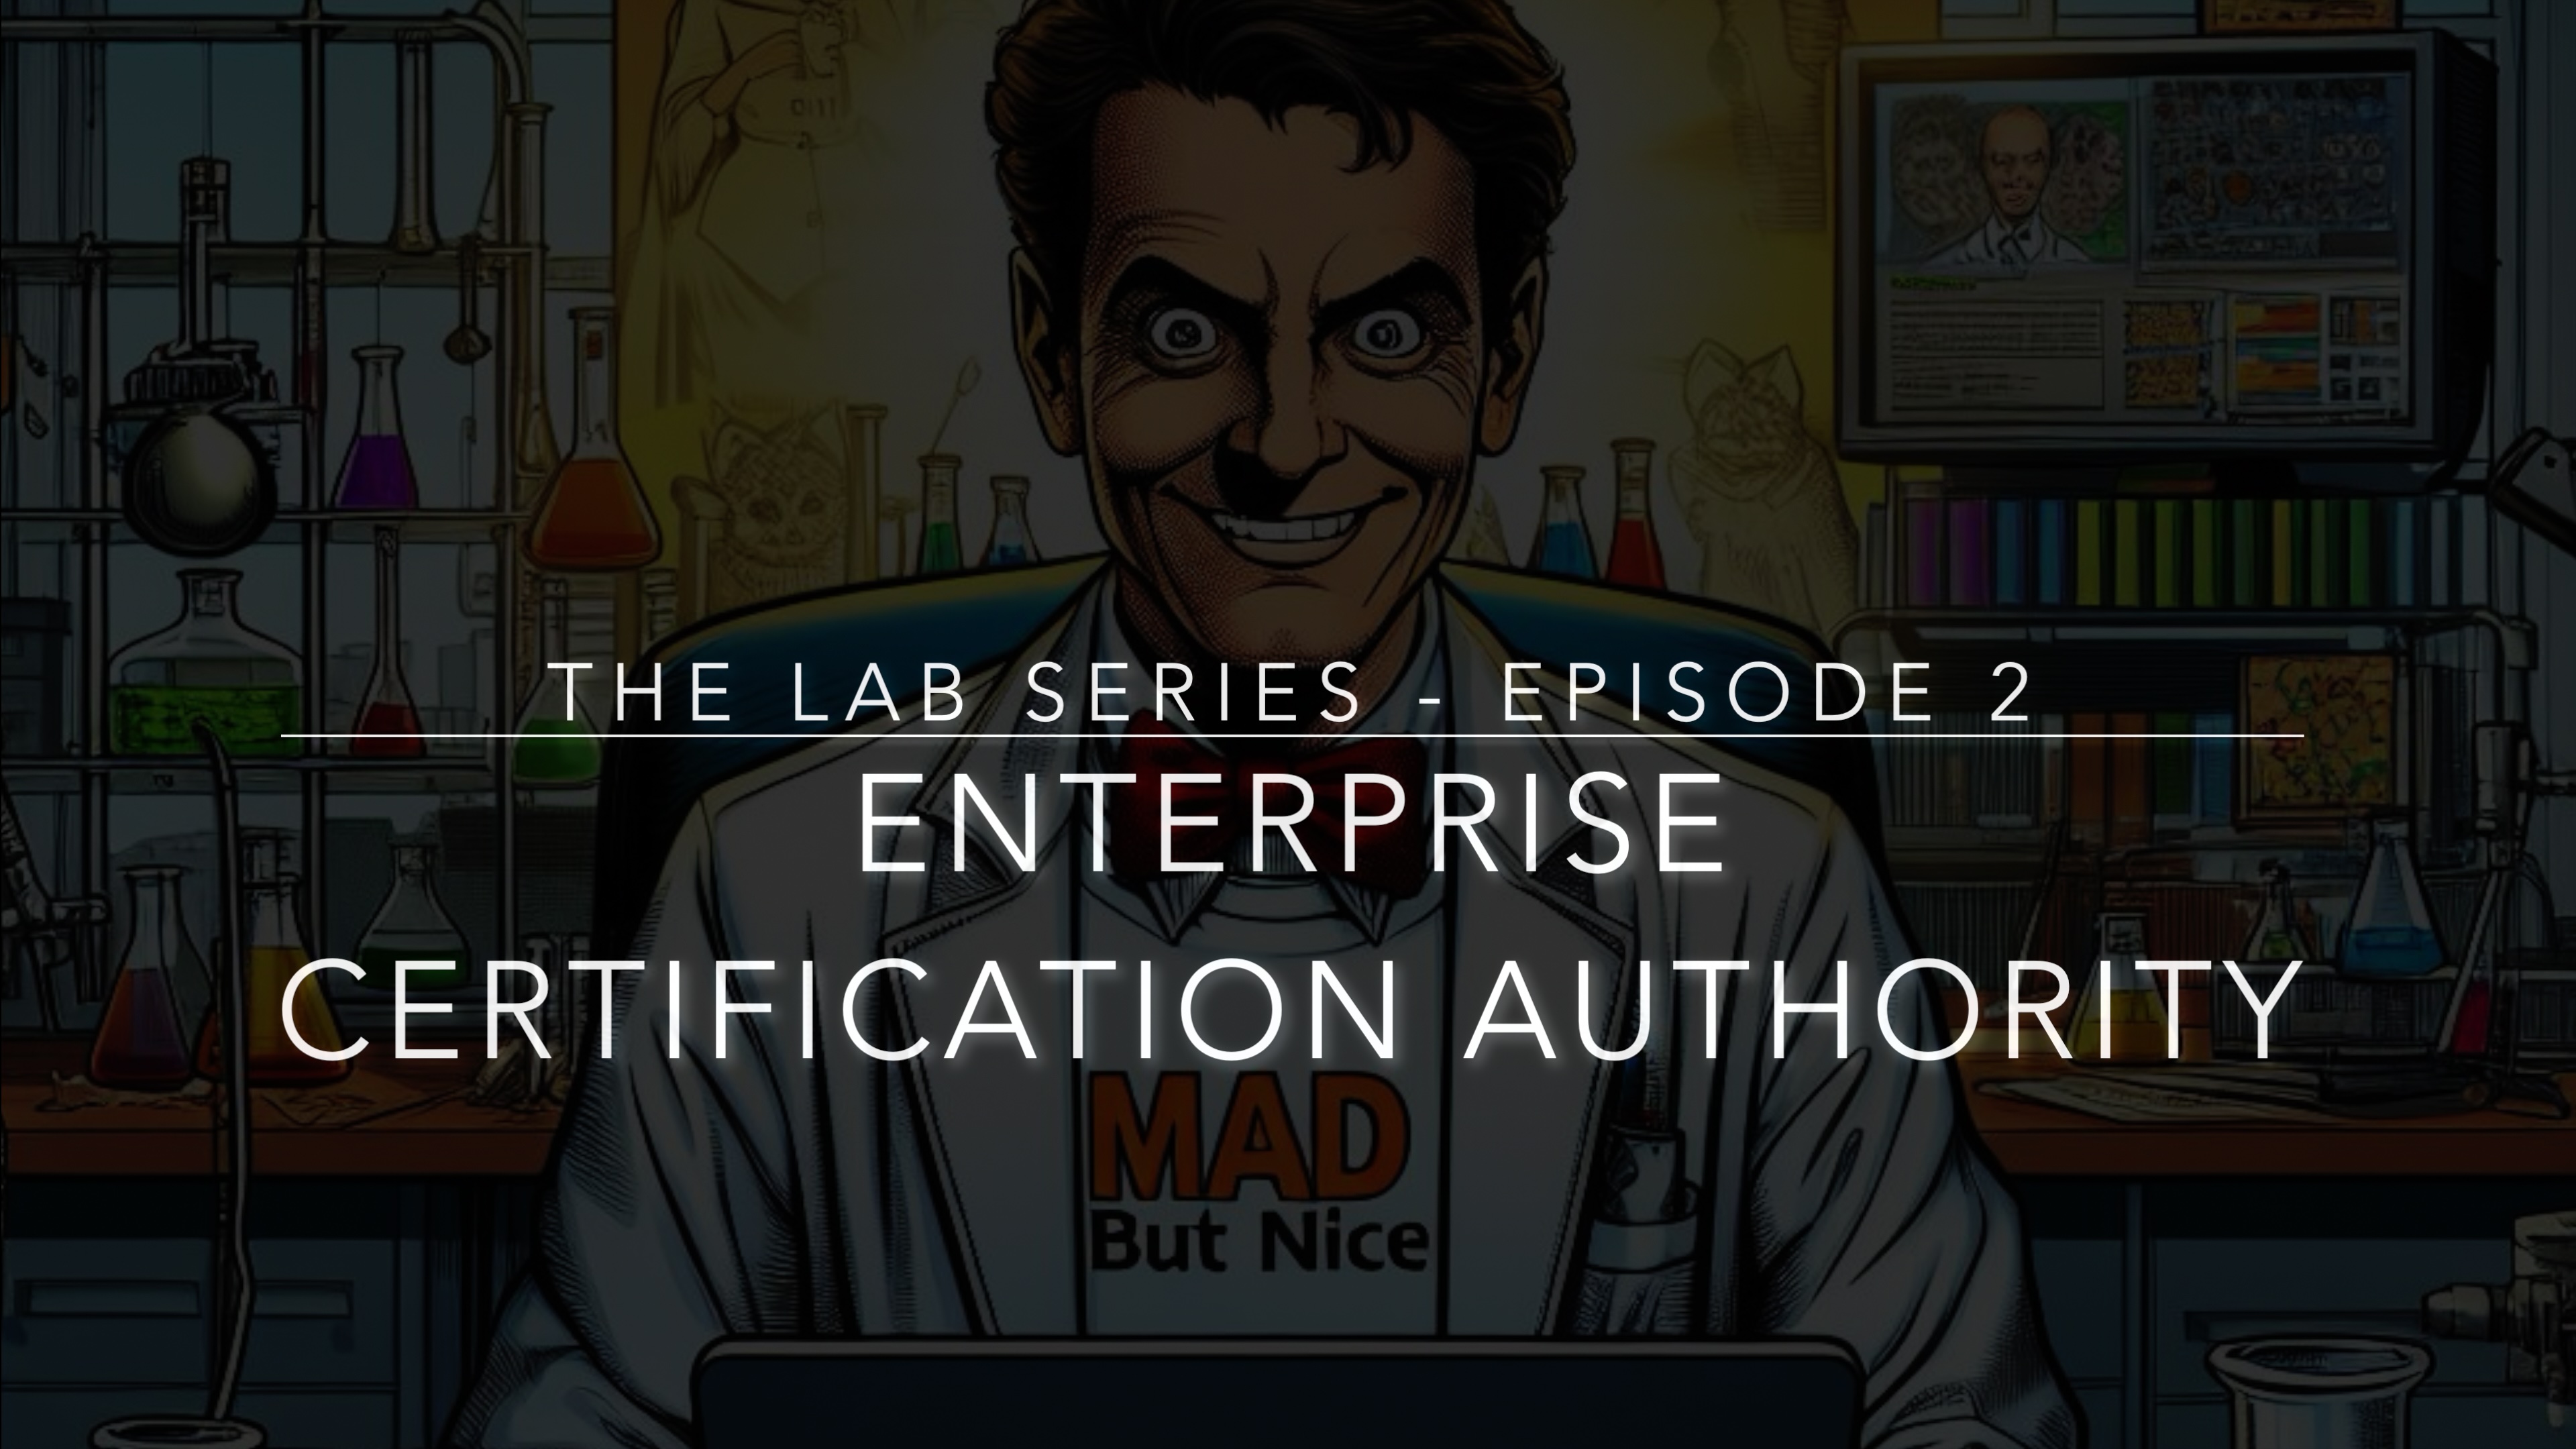 image from The Lab - Episodio 2 - Installare una Enterprise Certification Authority